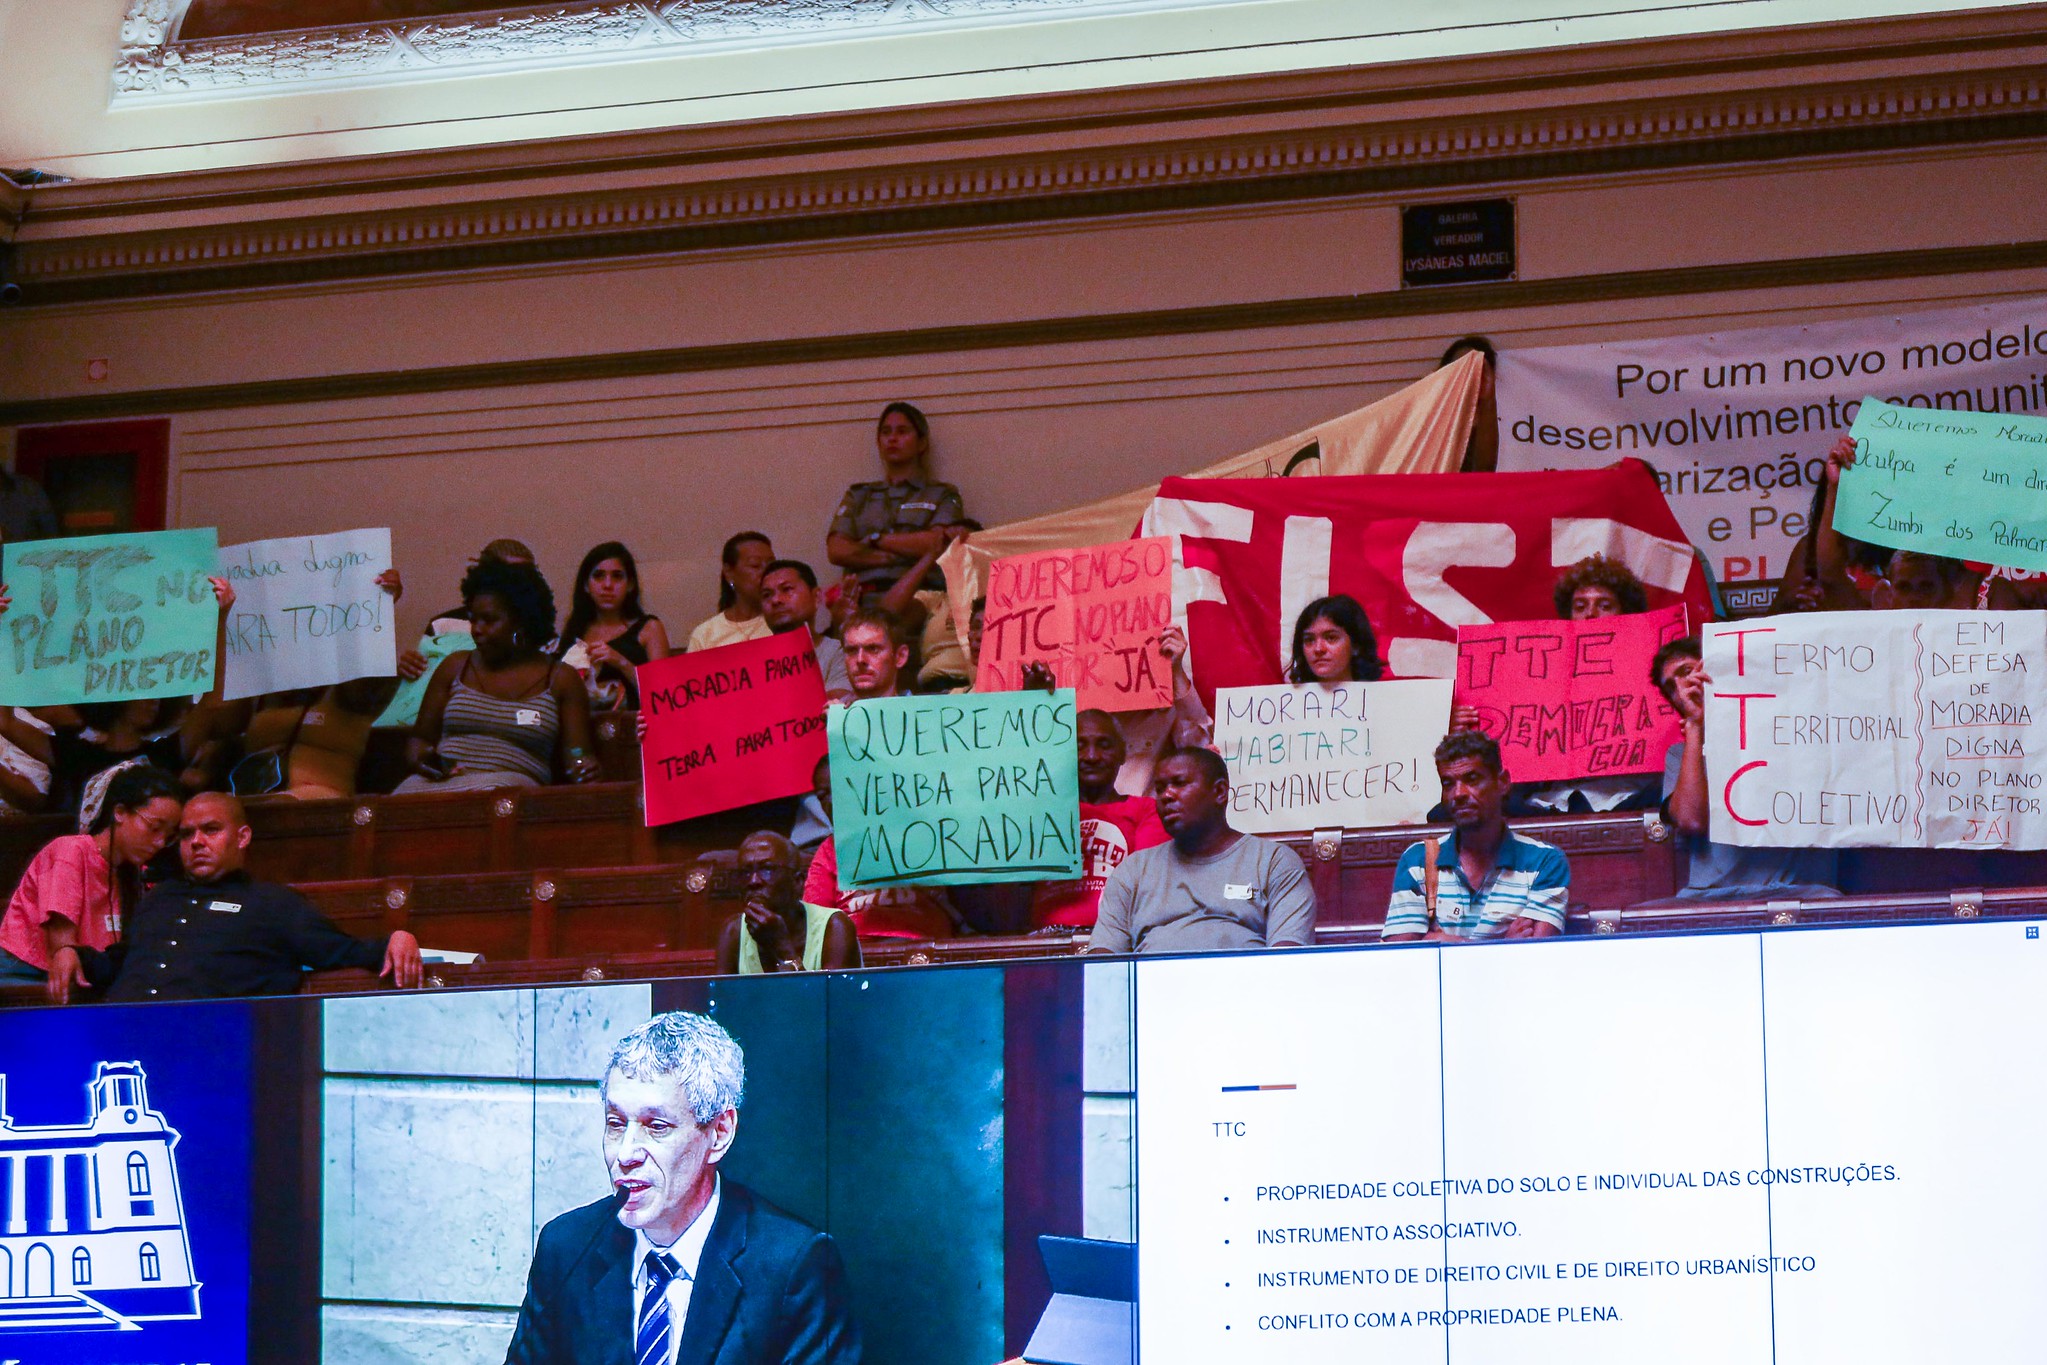 Members of the public demonstrate support for the Community Land Trust (CLT) remaining in the Rio de Janeiro Master Plan with signs and banners at the public hearing on April 5. 